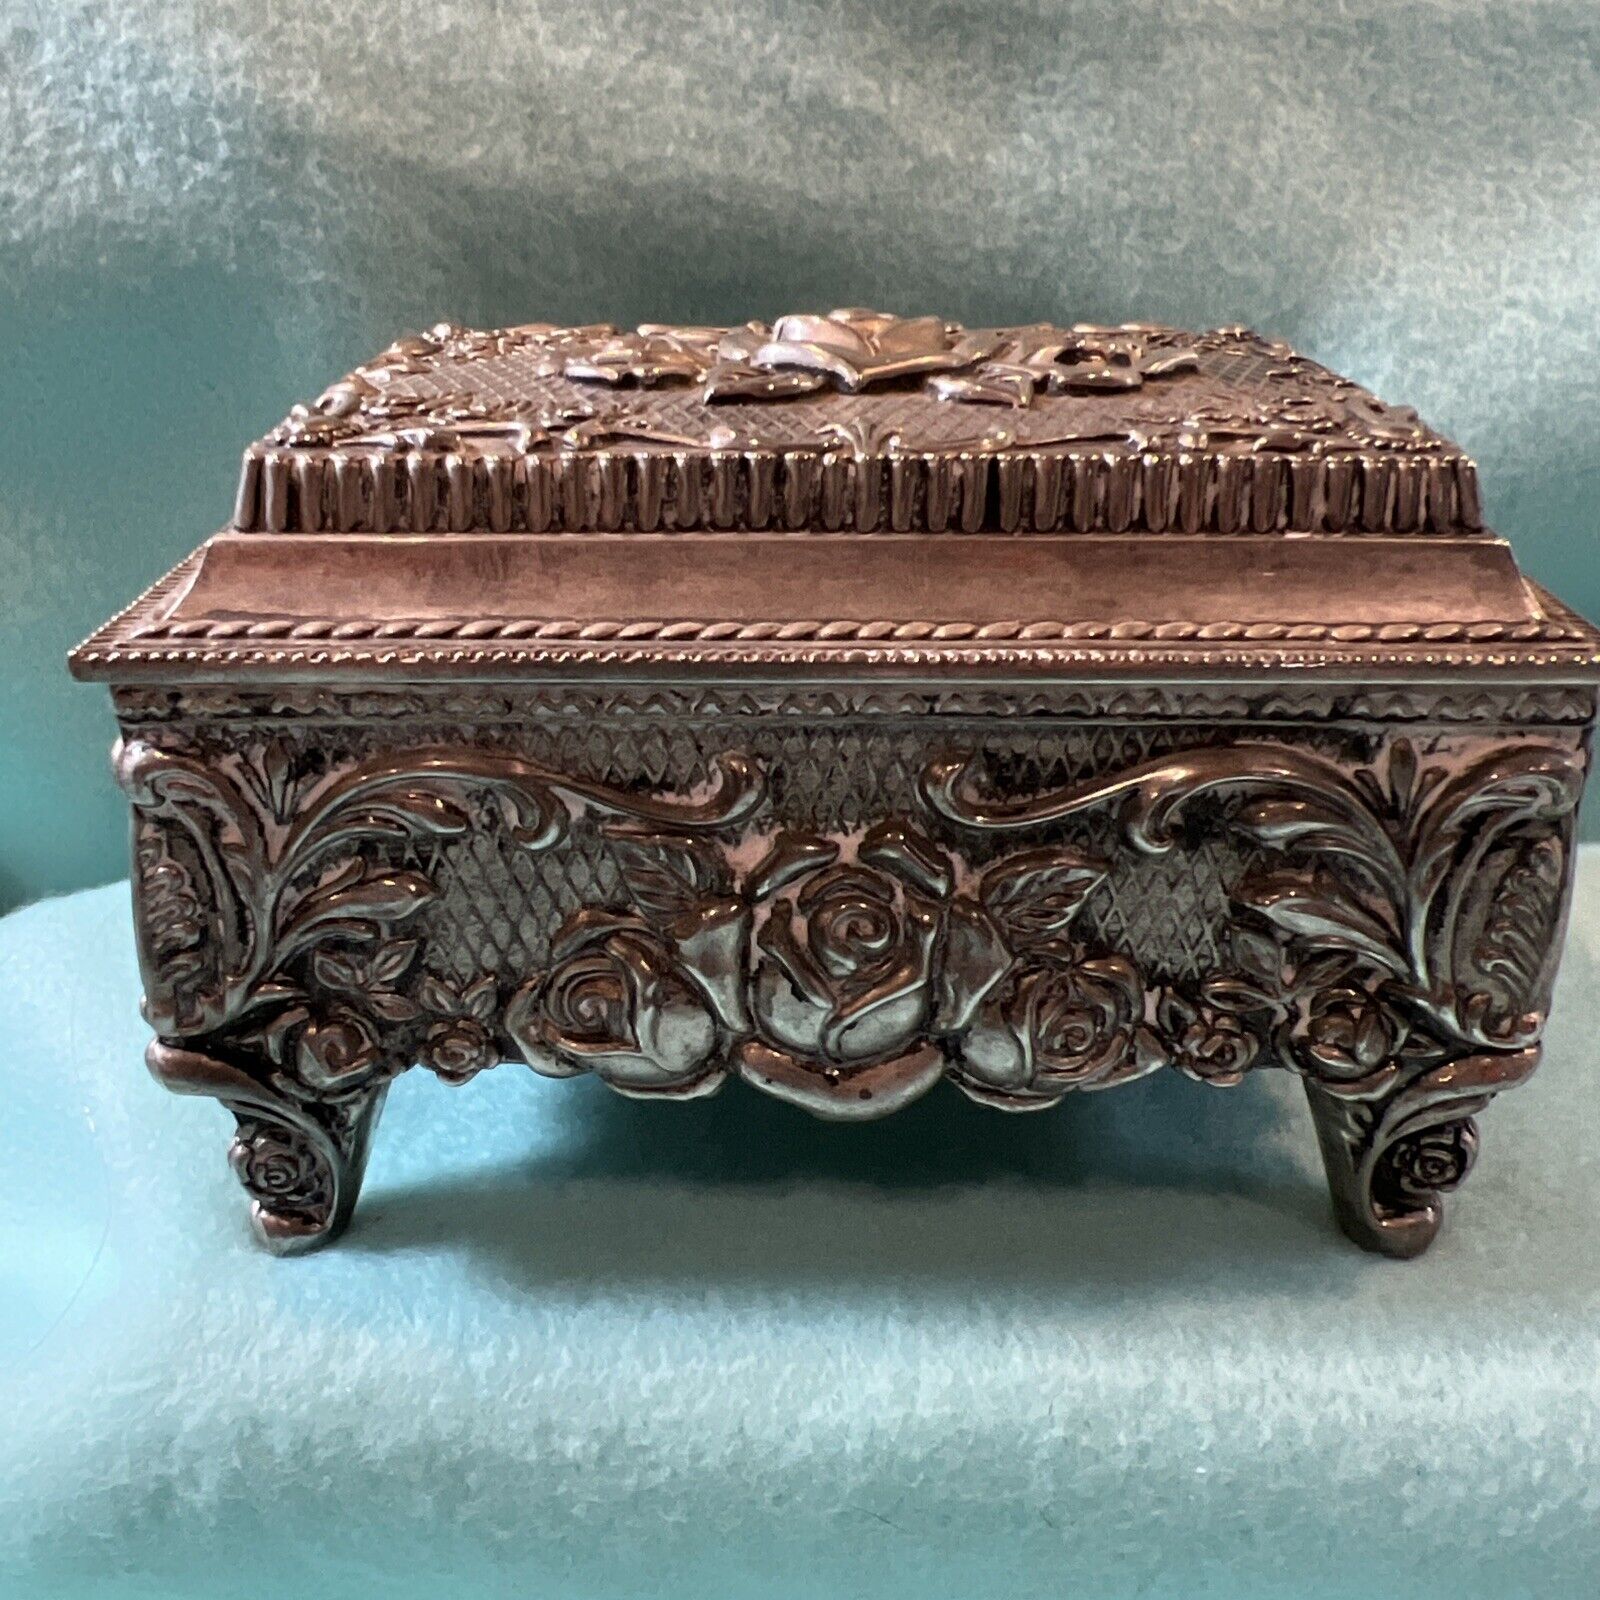 Vtg Victorian Jewelry Box Designed W/ Roses. Footed Black Velvet Lined.